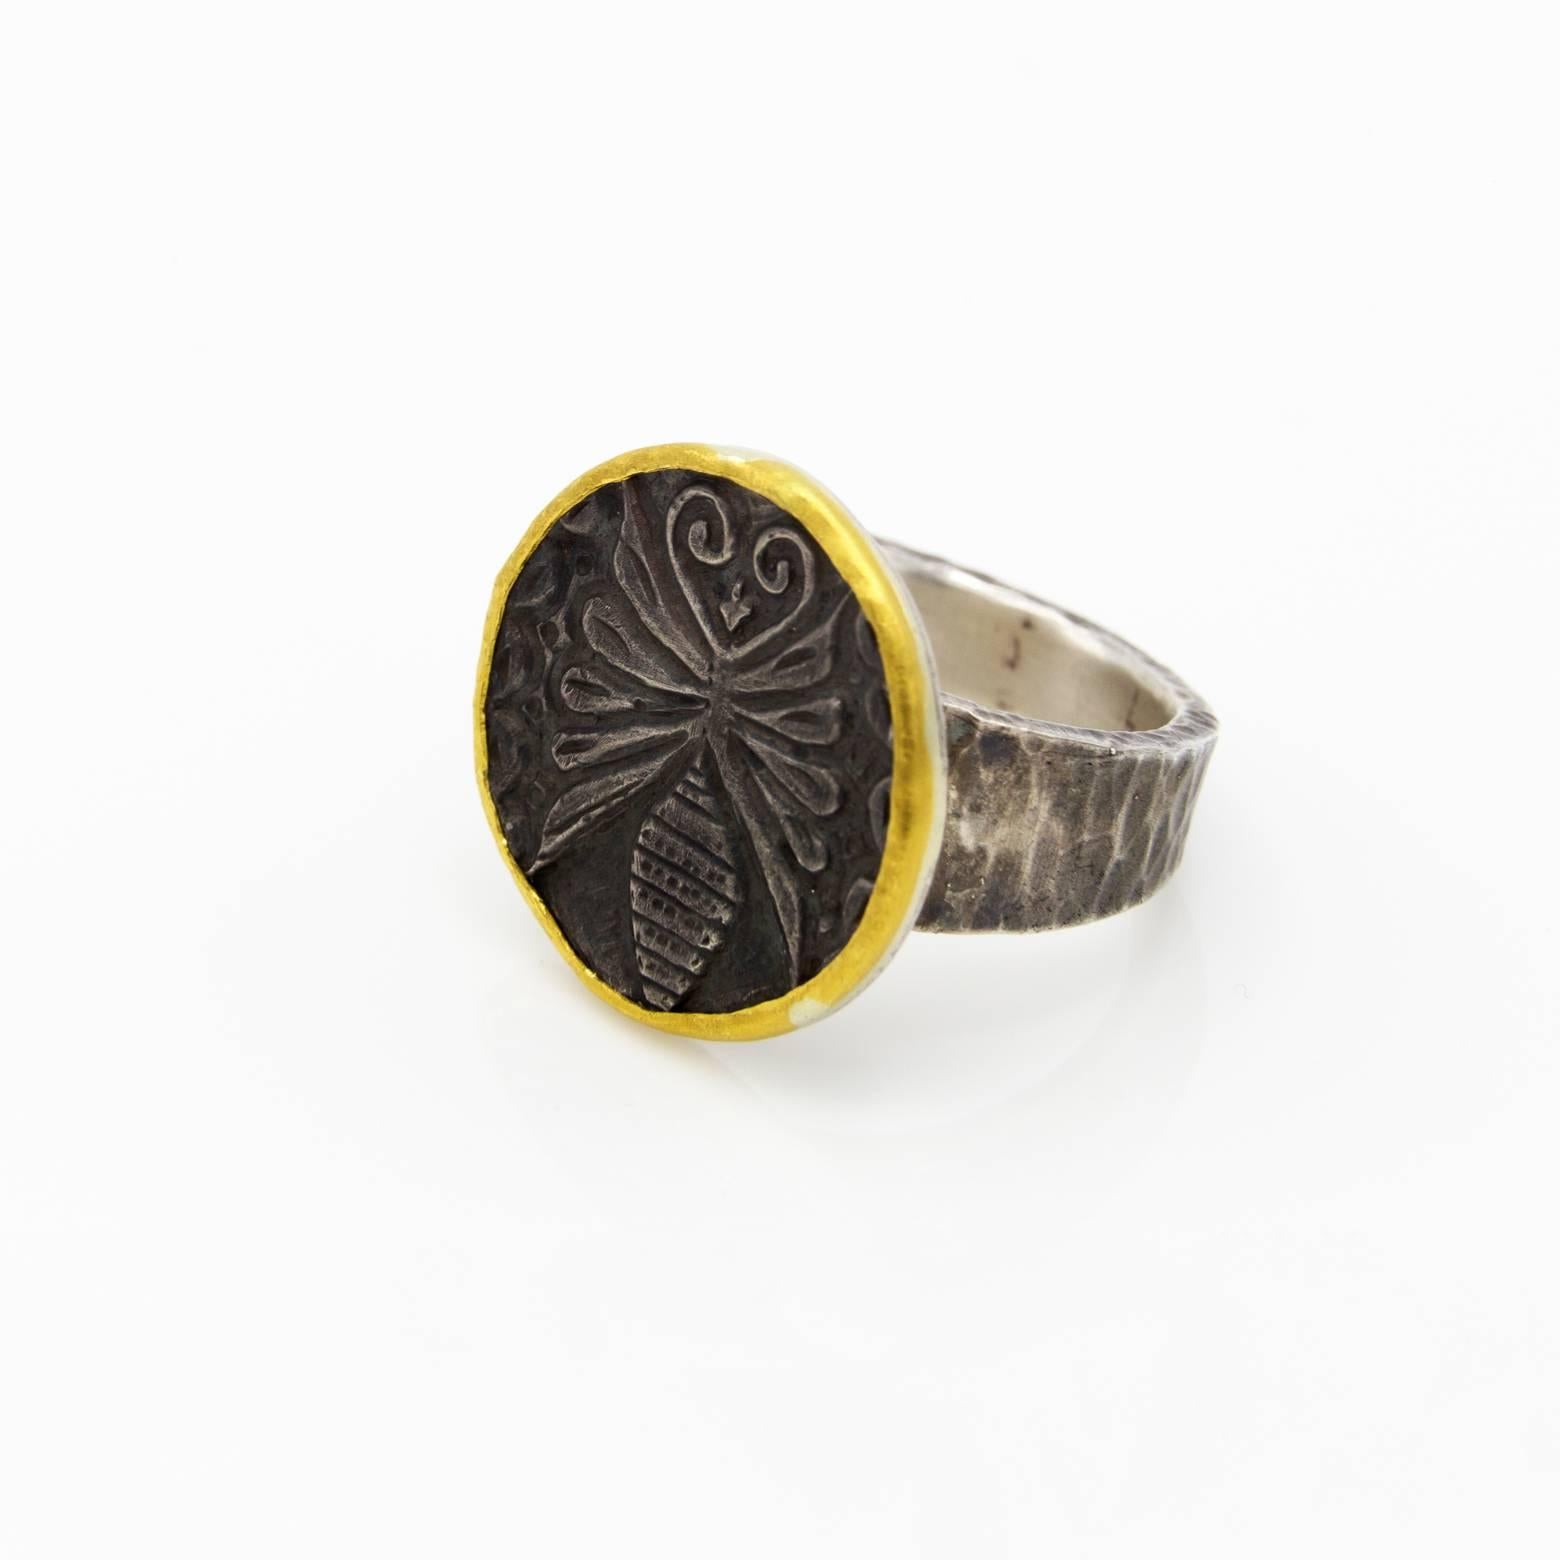 Butterfly, bugs and insects! This beautiful handmade ring looks like a thick coin with a gold border and a gorgeous butterfly on top with swirls and wings. The bottom of the butterfly almost looks like a beehive and the detail in the texture looks